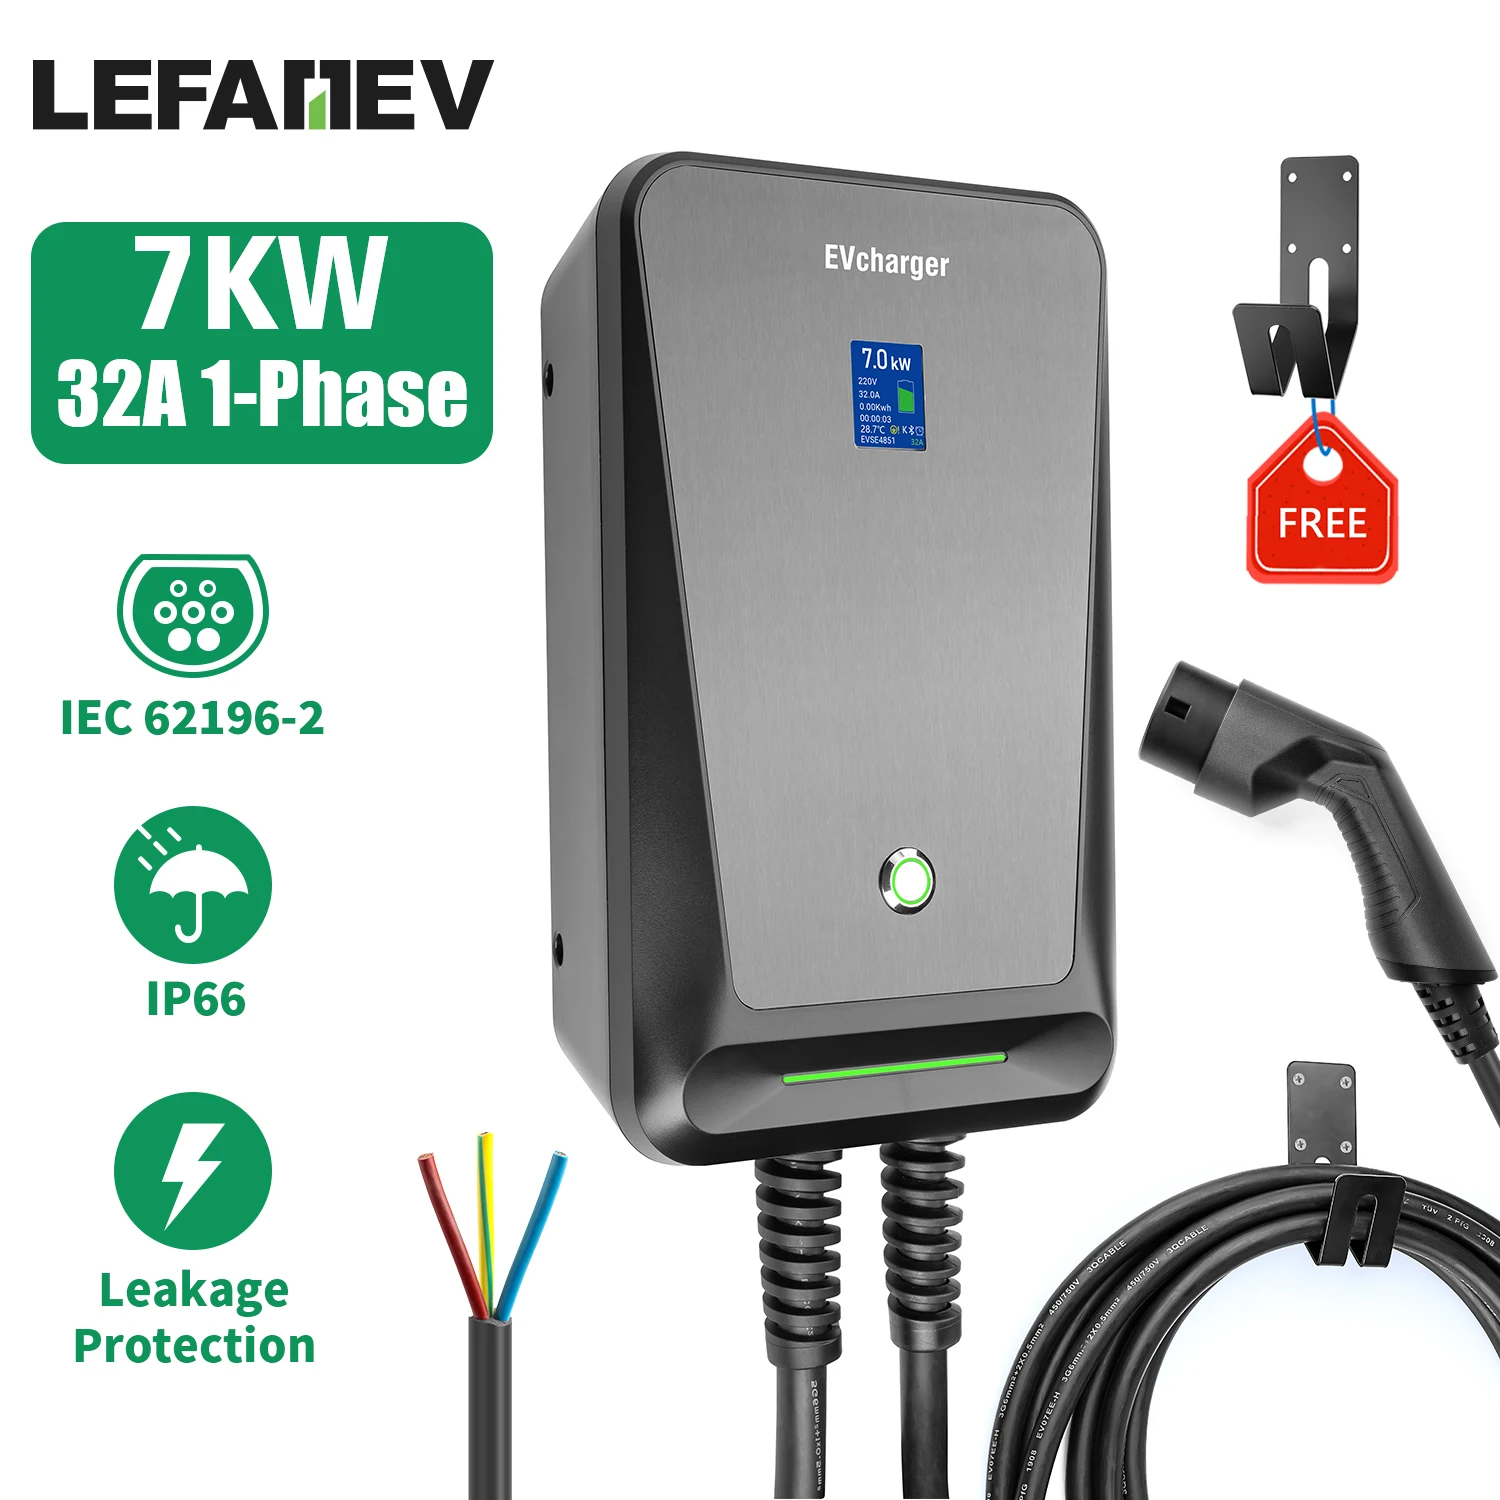 EV Charger Type 2 32A 1 Phase EVSE Wallbox Electric Car Charging Station with 6.1M Cable 7KW IEC 62196-2 for Tesla for Nissan